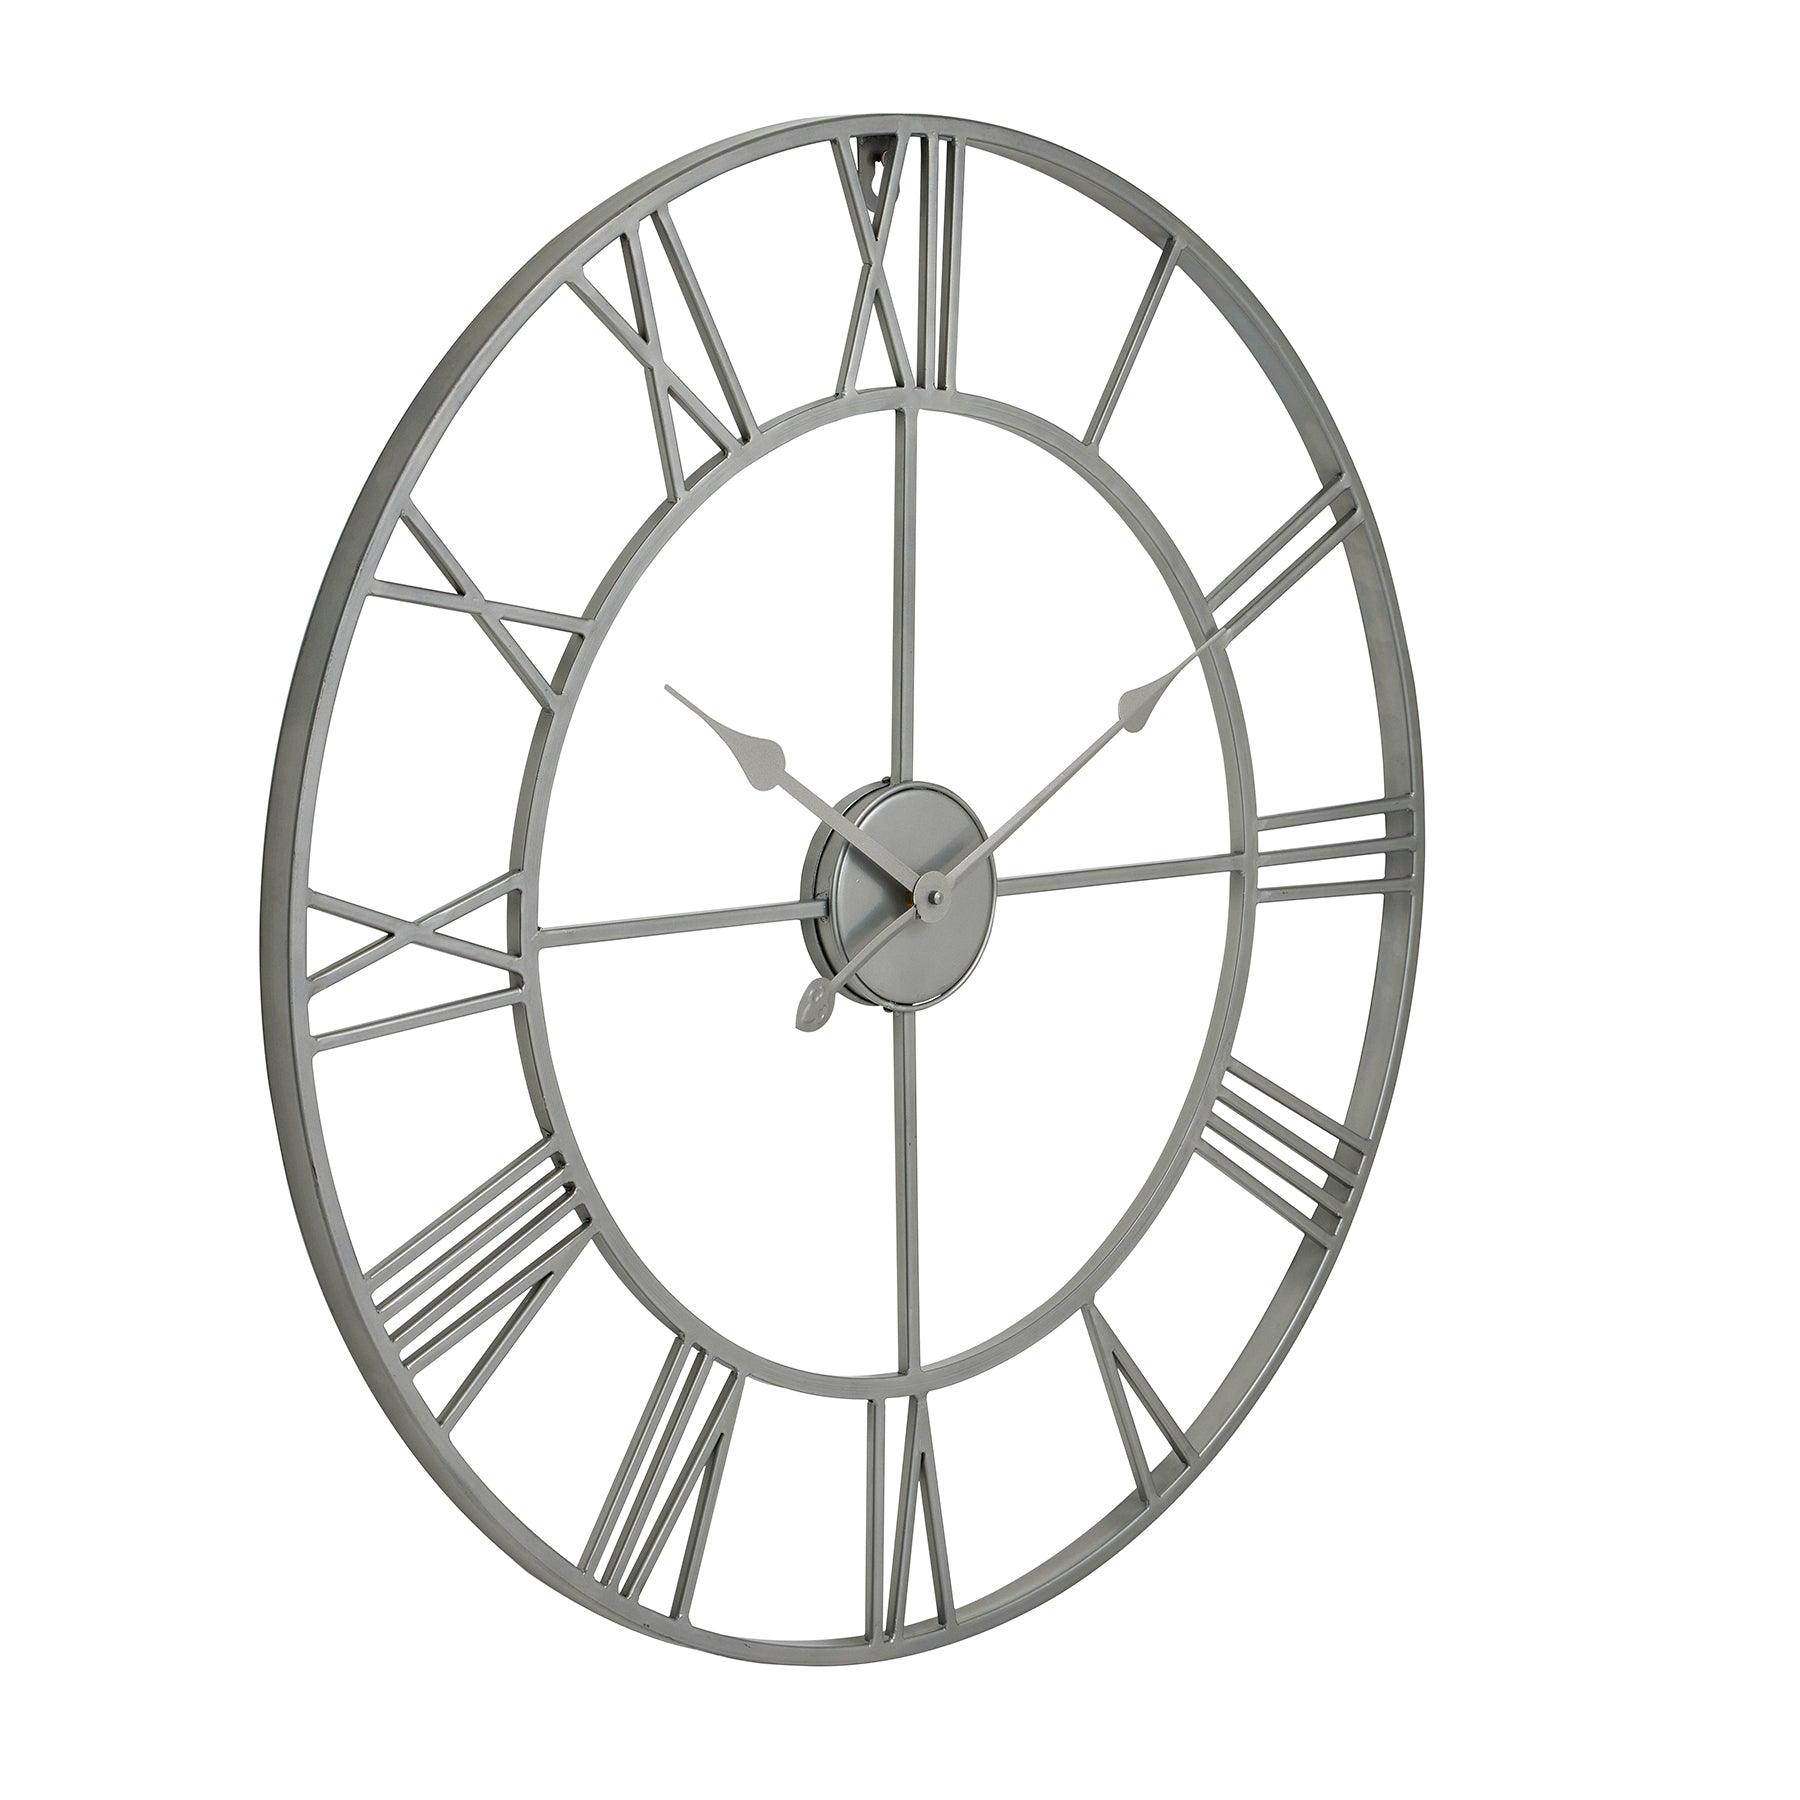 View Silver Skeleton Wall Clock information